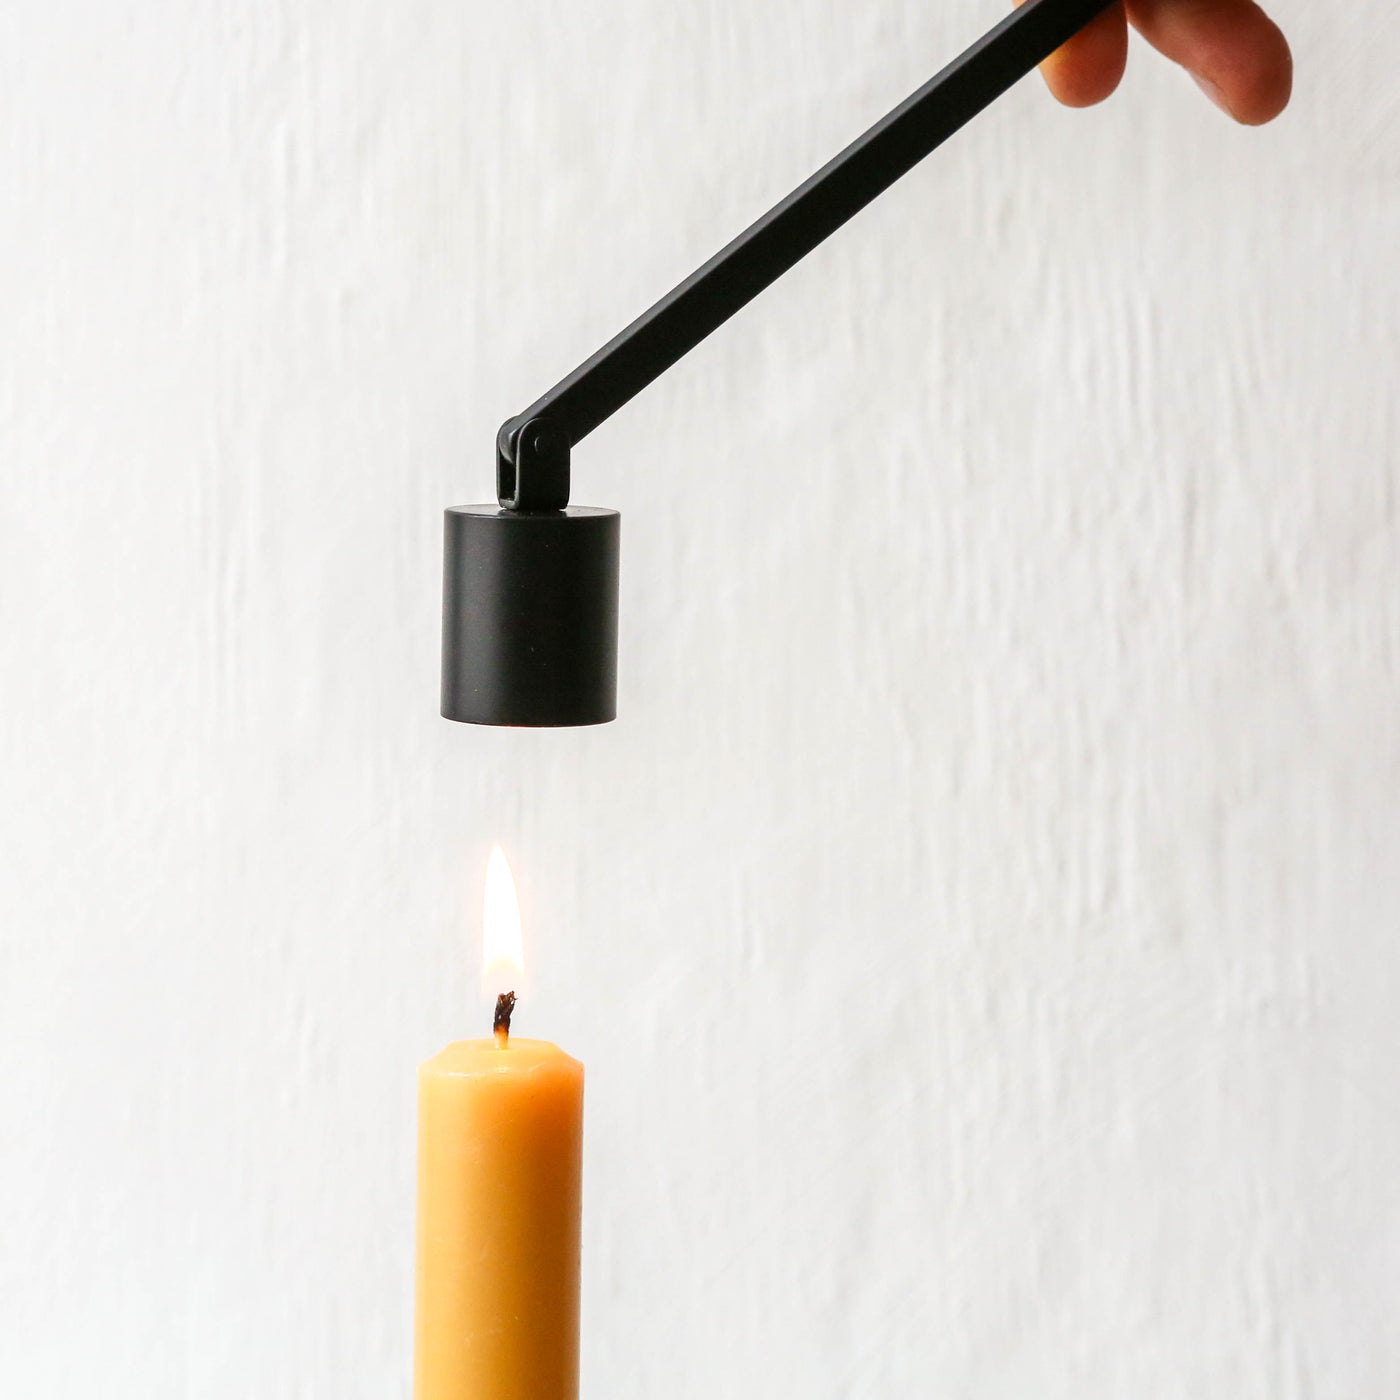 Black Bell Candle Snuffer